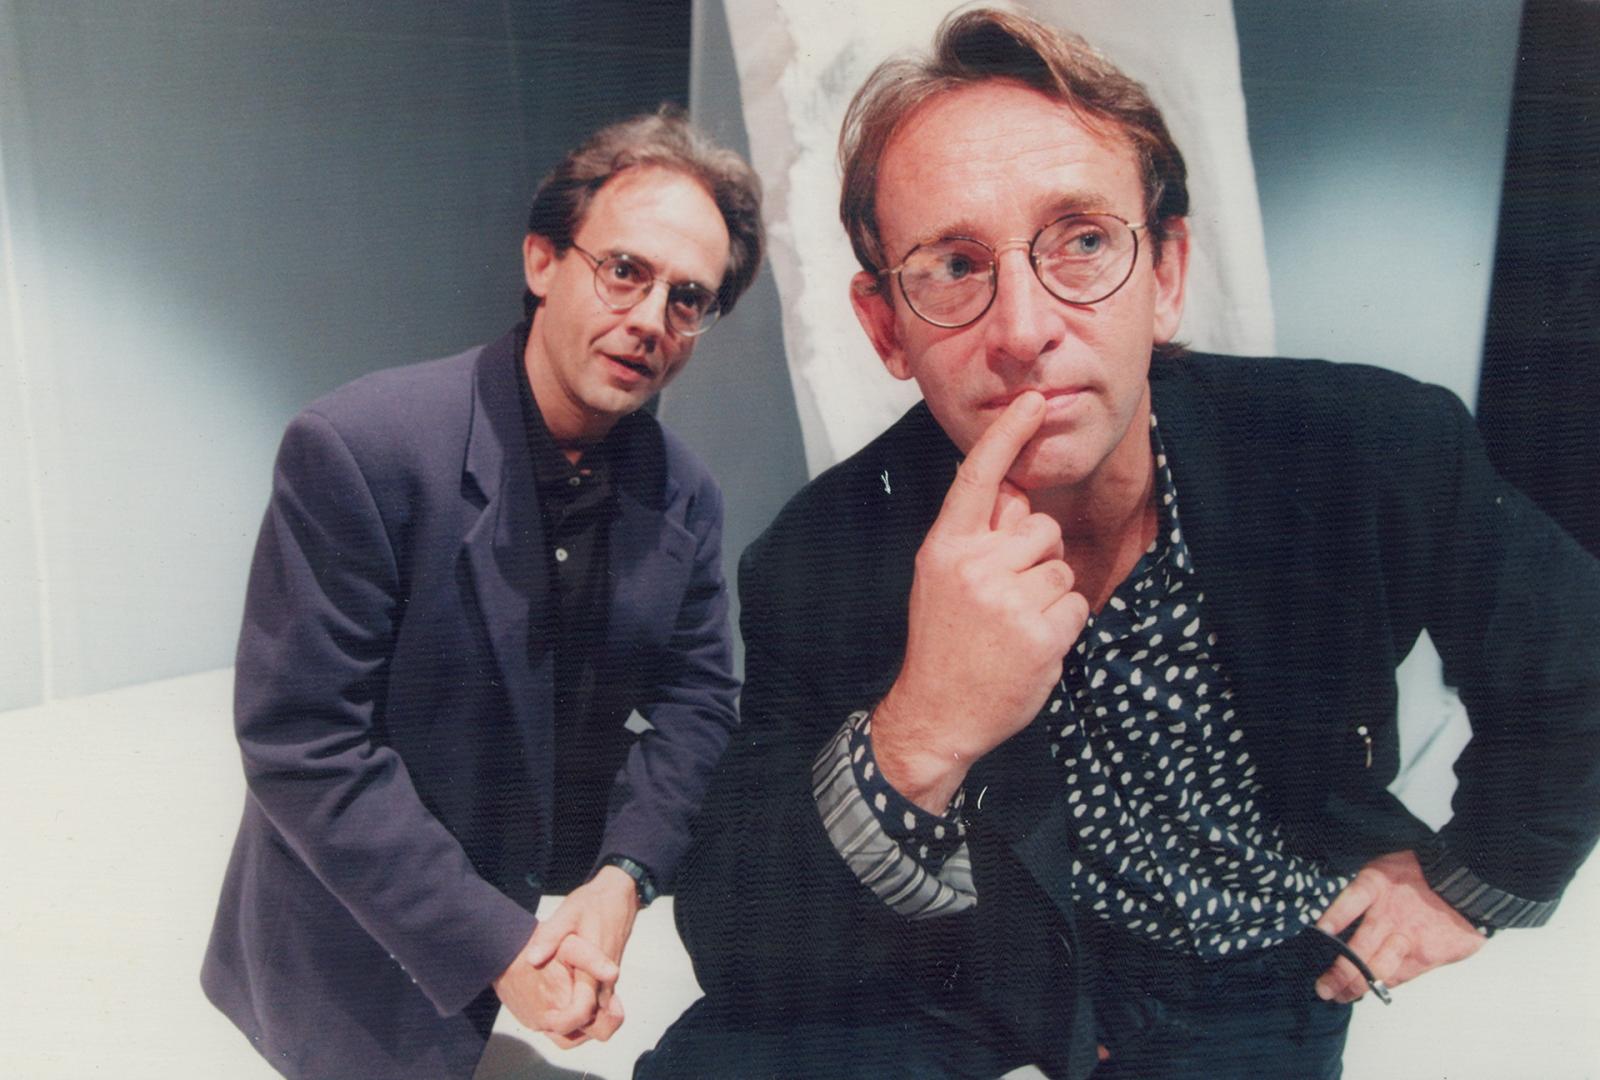 Richard Rose (Director) and David Young (Playwright)